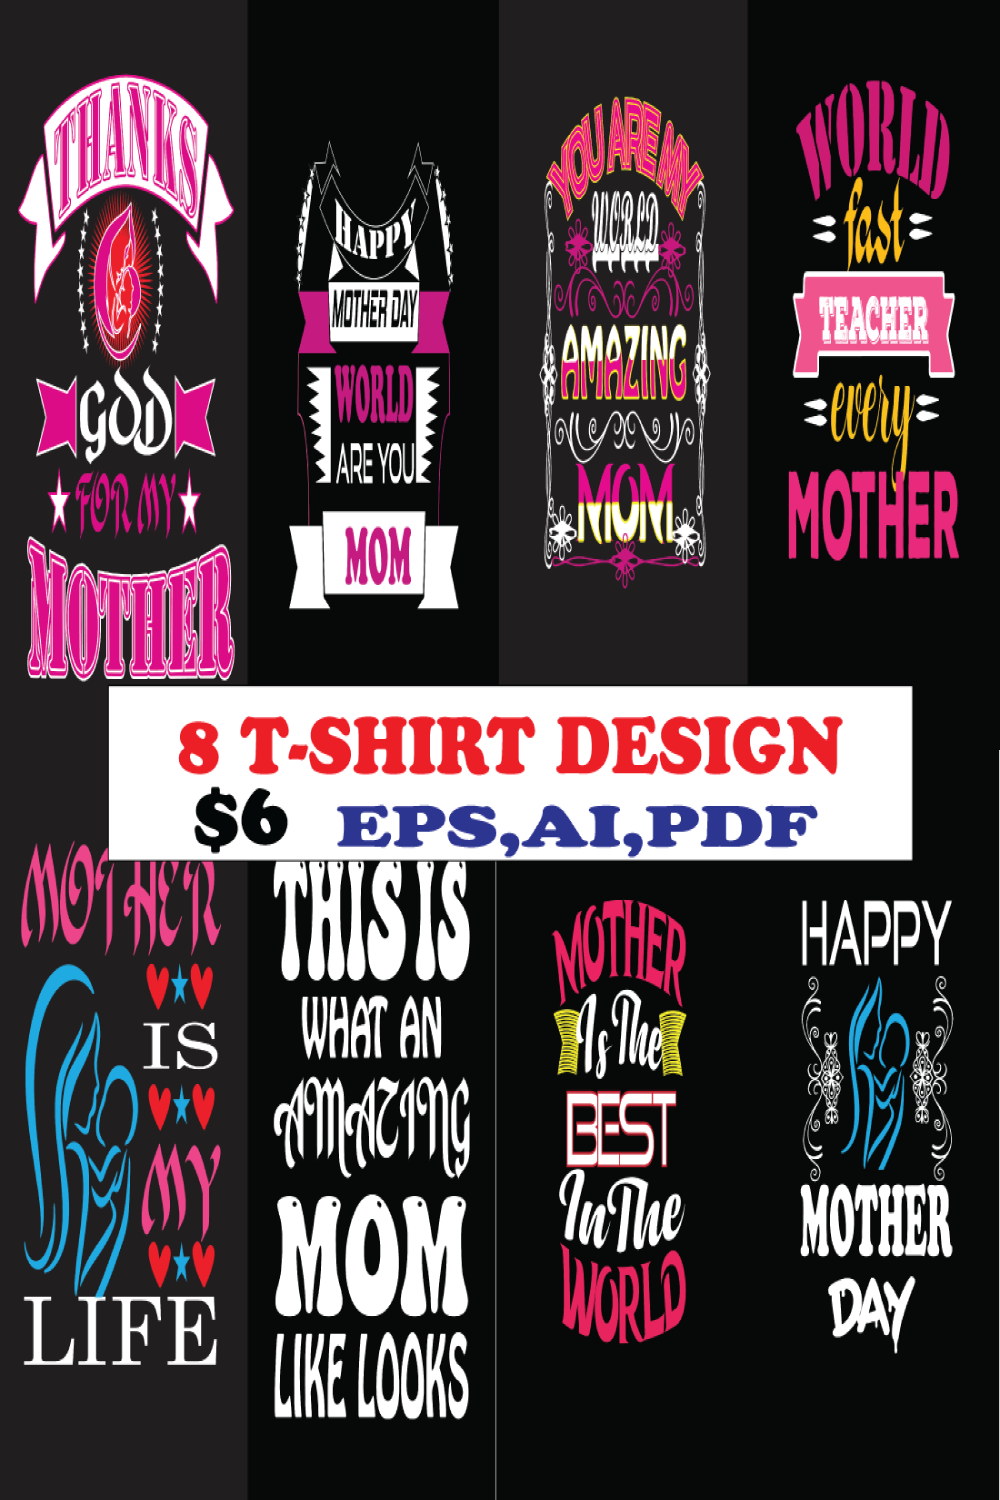 Mother day T-shirt design pinterest preview image.